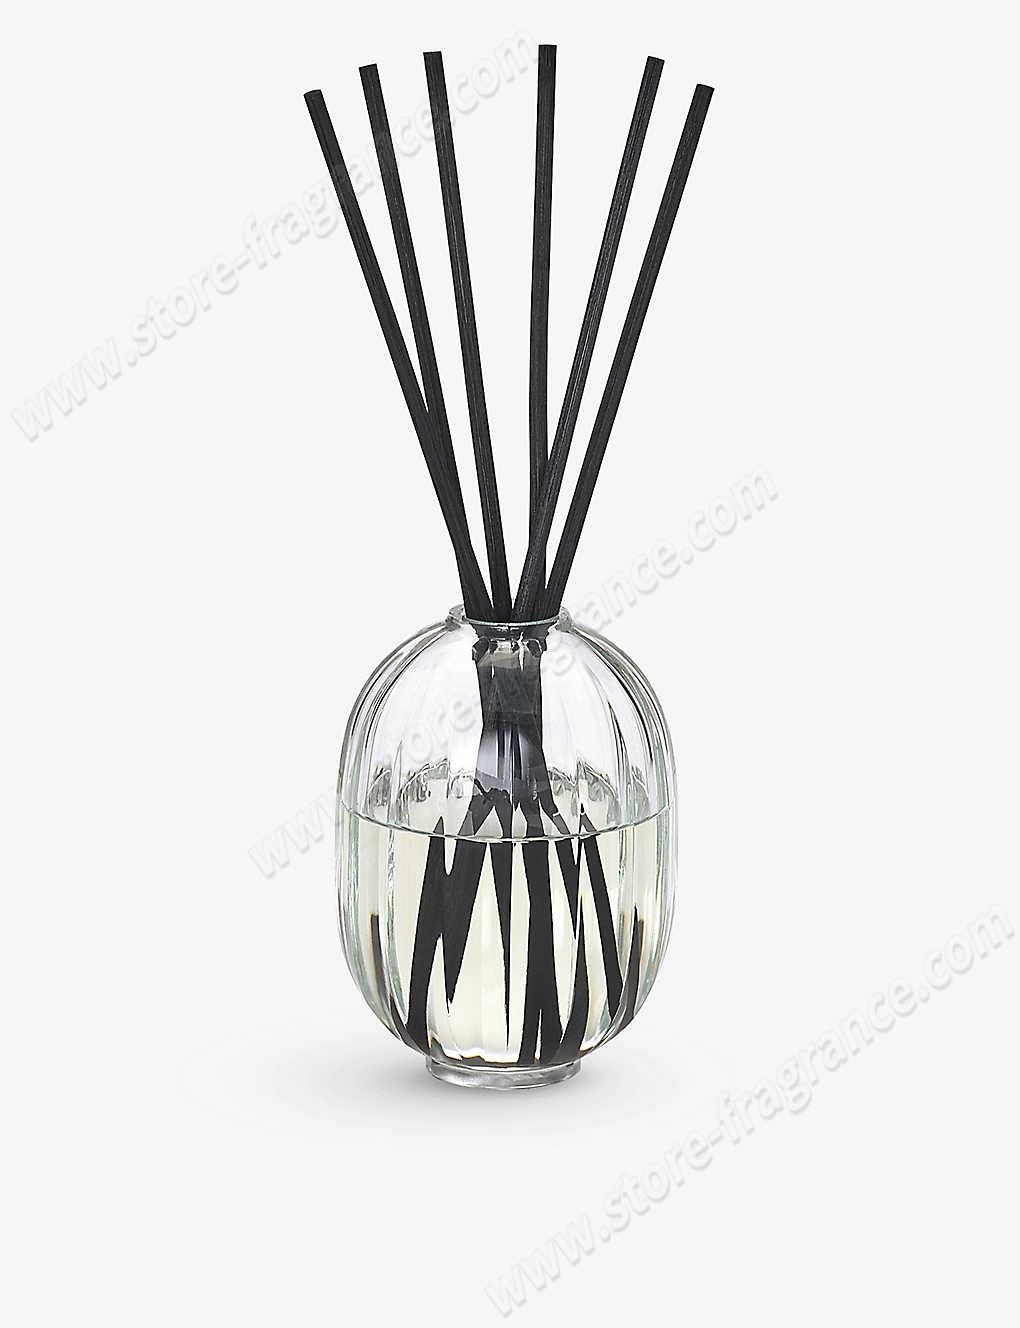 DIPTYQUE/Roses reed diffuser refill 200ml Limit Offer - DIPTYQUE/Roses reed diffuser refill 200ml Limit Offer